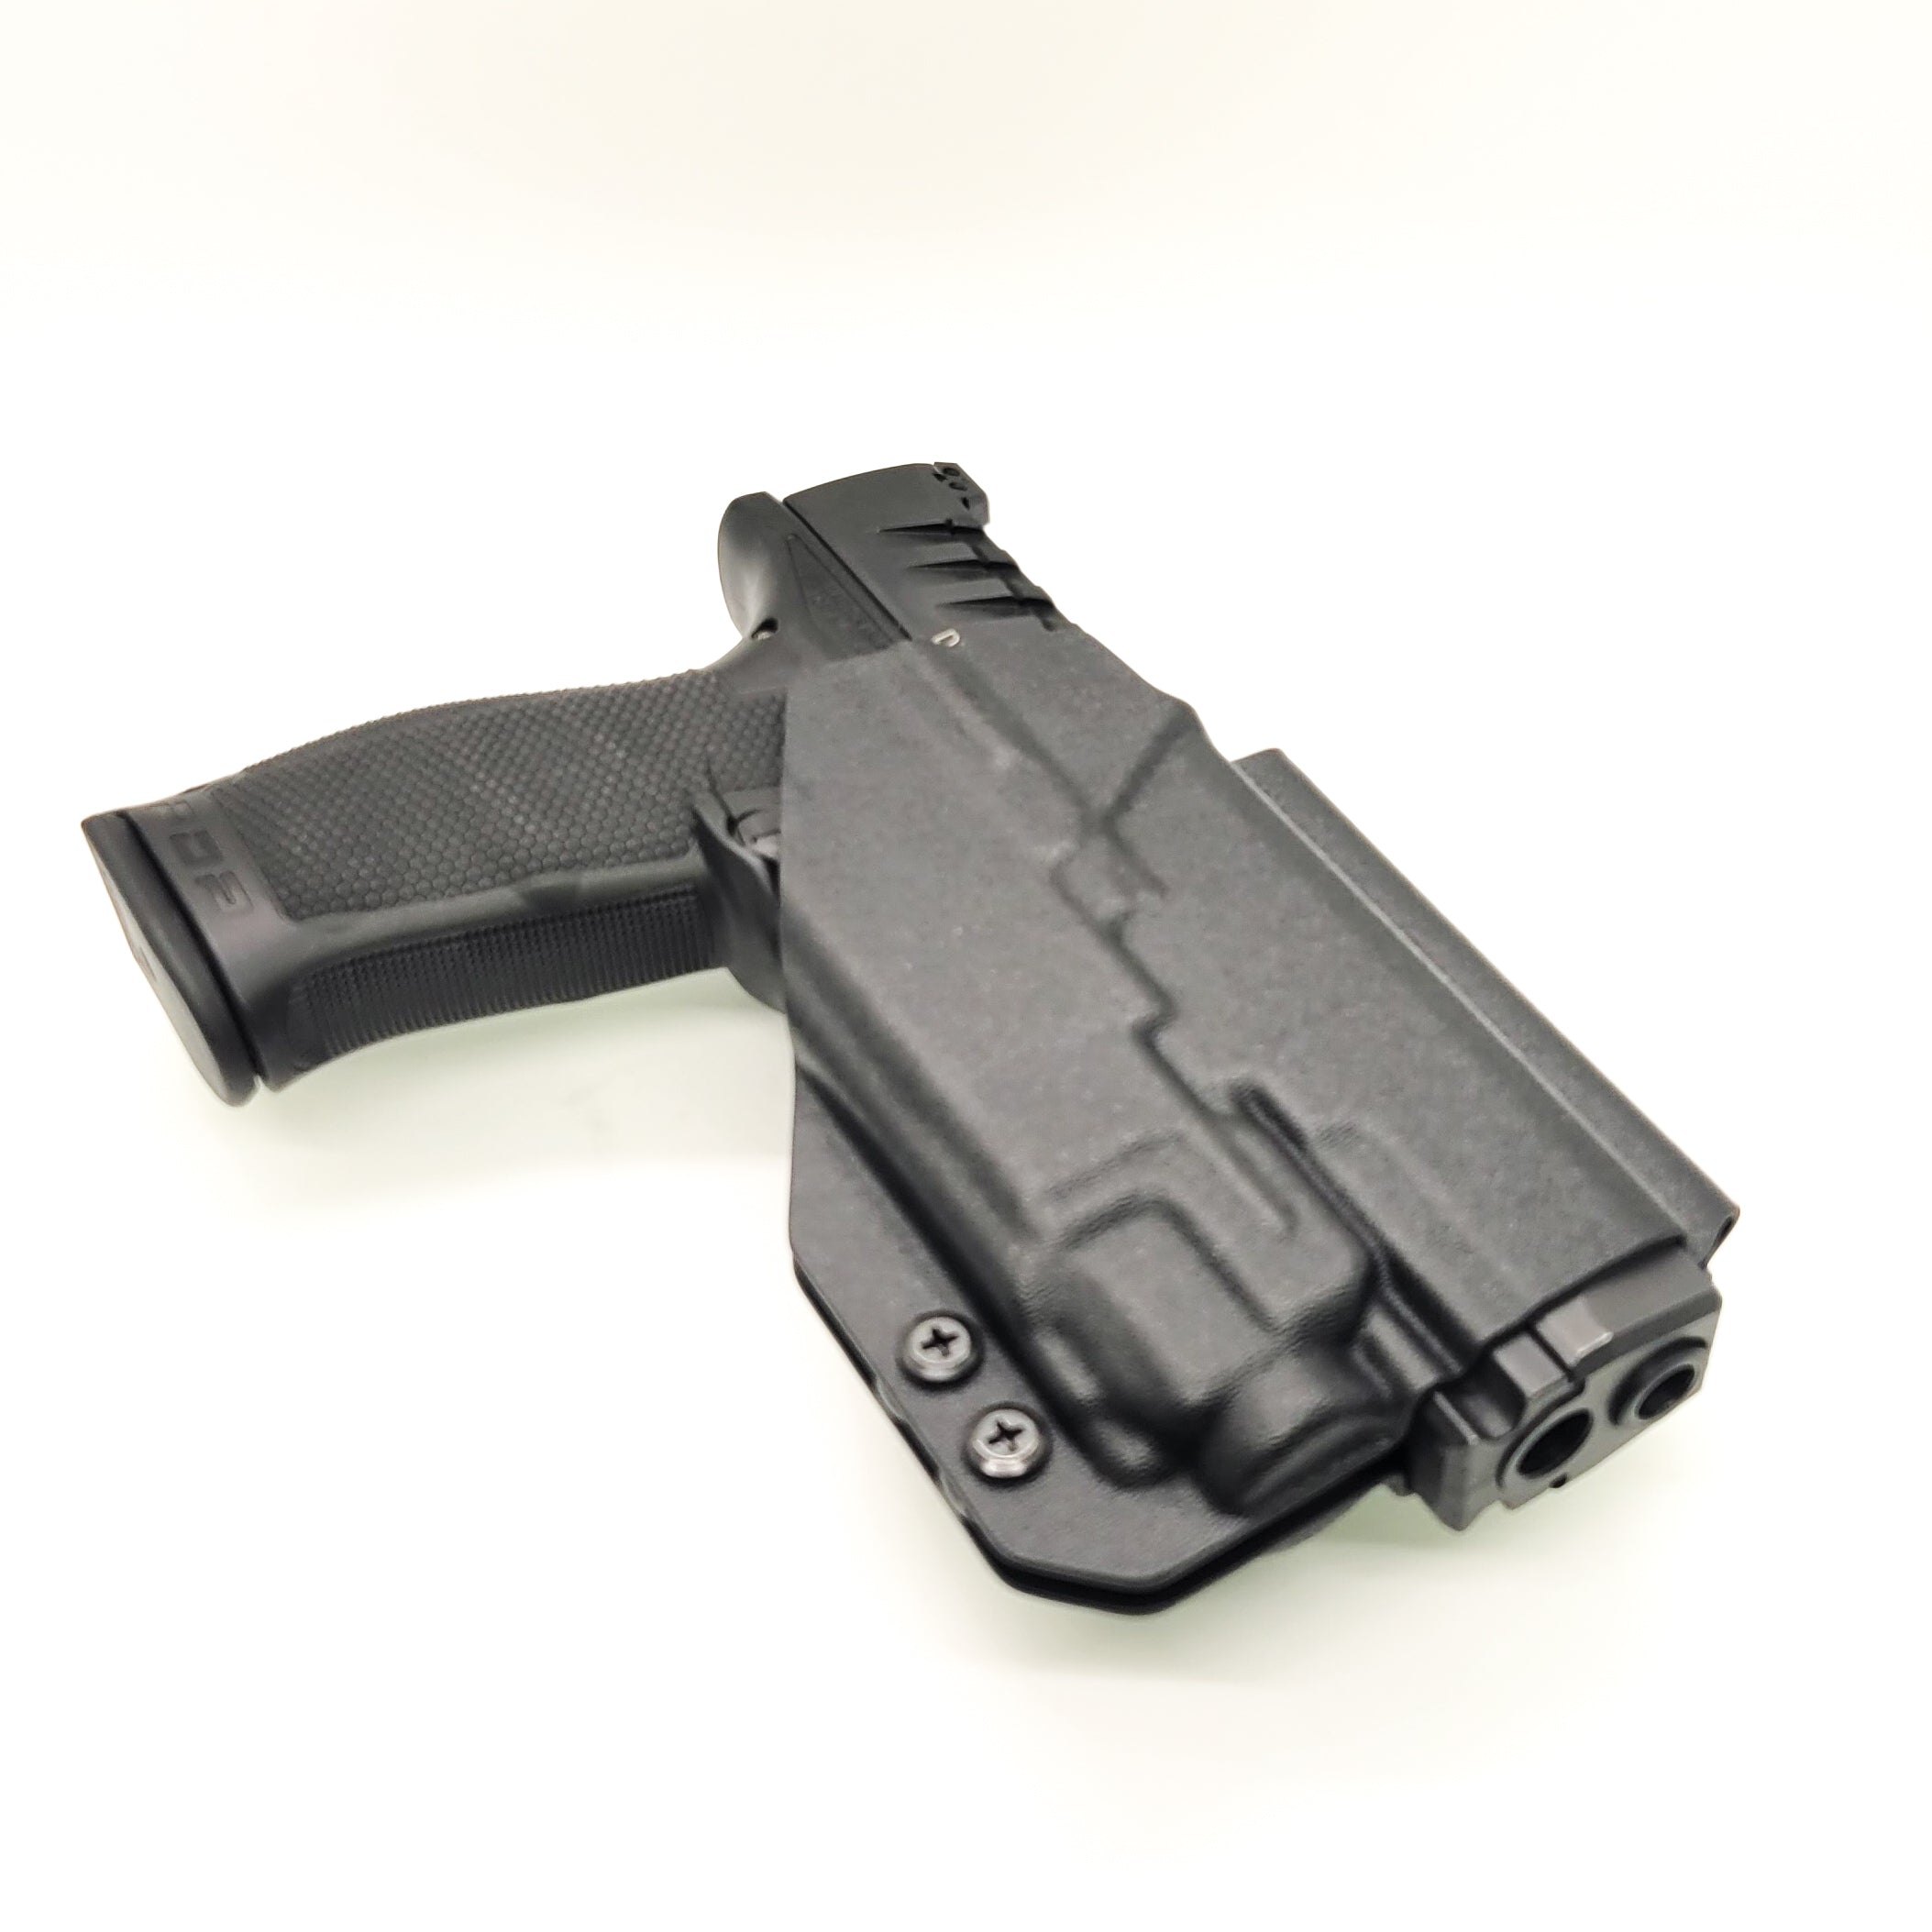 For the best Outside Waistband Taco Style Holster designed to fit the Walther PDP 4" Full-Size pistol with the Streamlight TLR-8 mounted on the firearm, shop Four Brothers Holsters. Cut for red dot sight, full sweat guard, adjustable retention & open muzzle for threaded barrels & compensators.